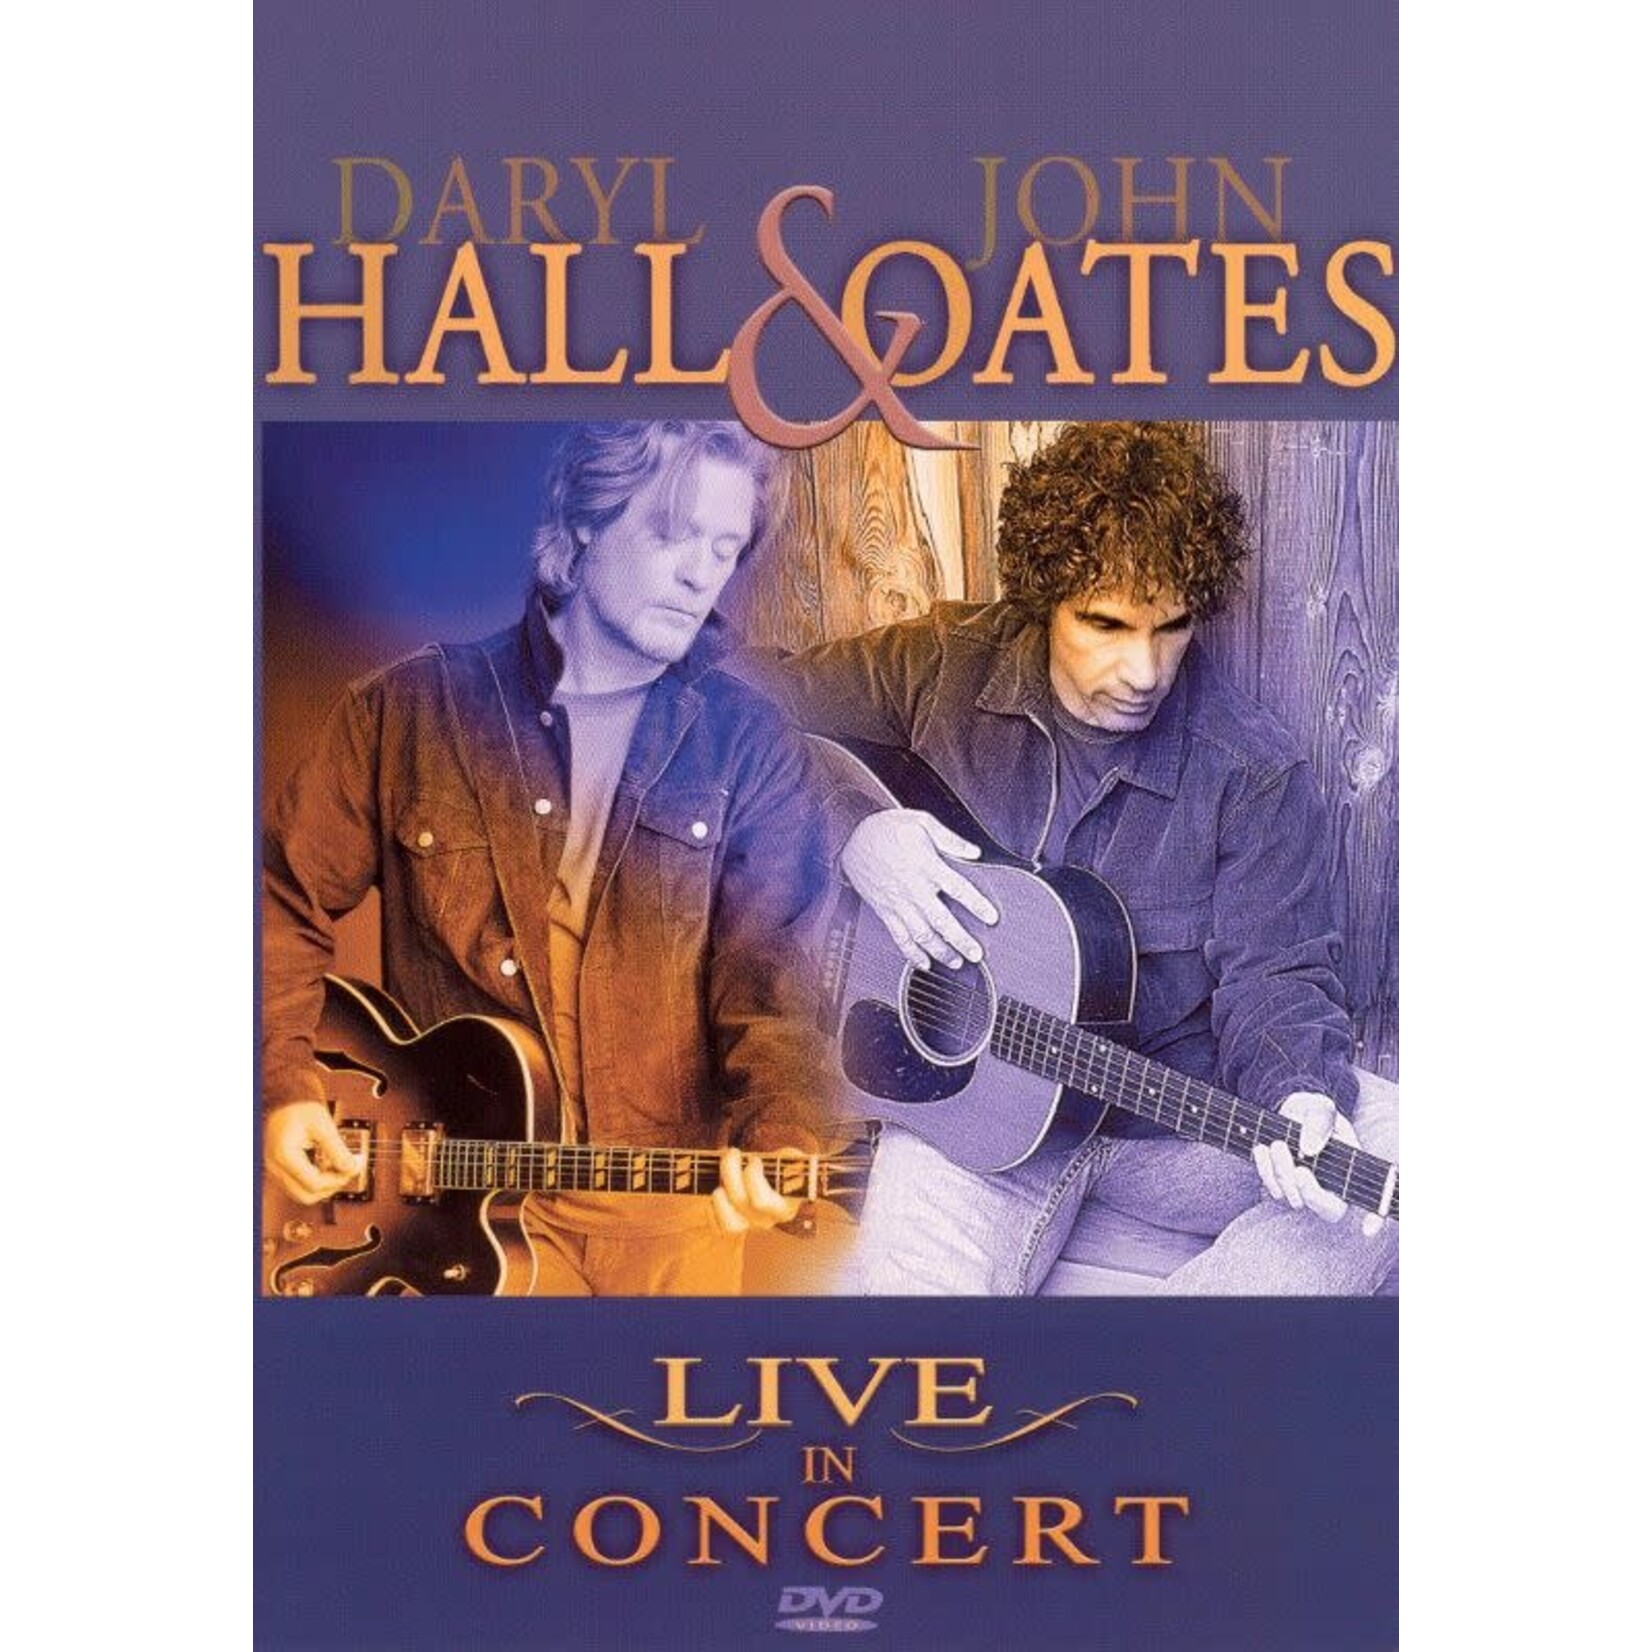 Daryl Hall & John Oates - Live In Concert [USED 2DVD]